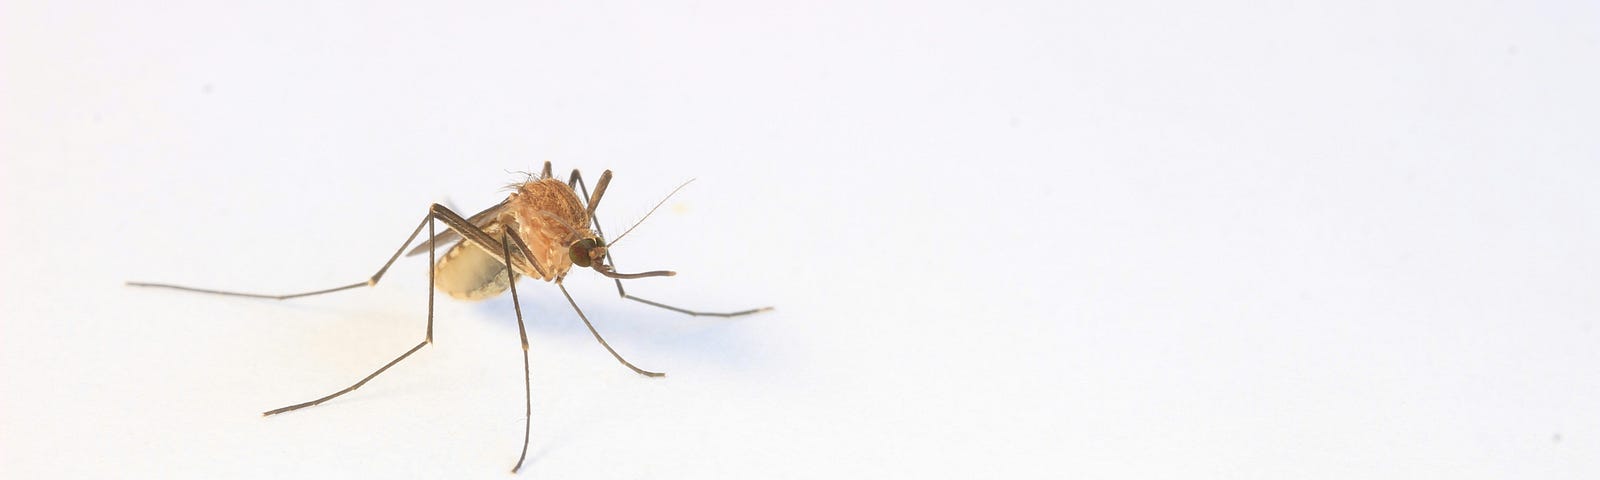 an image of a  mosquito